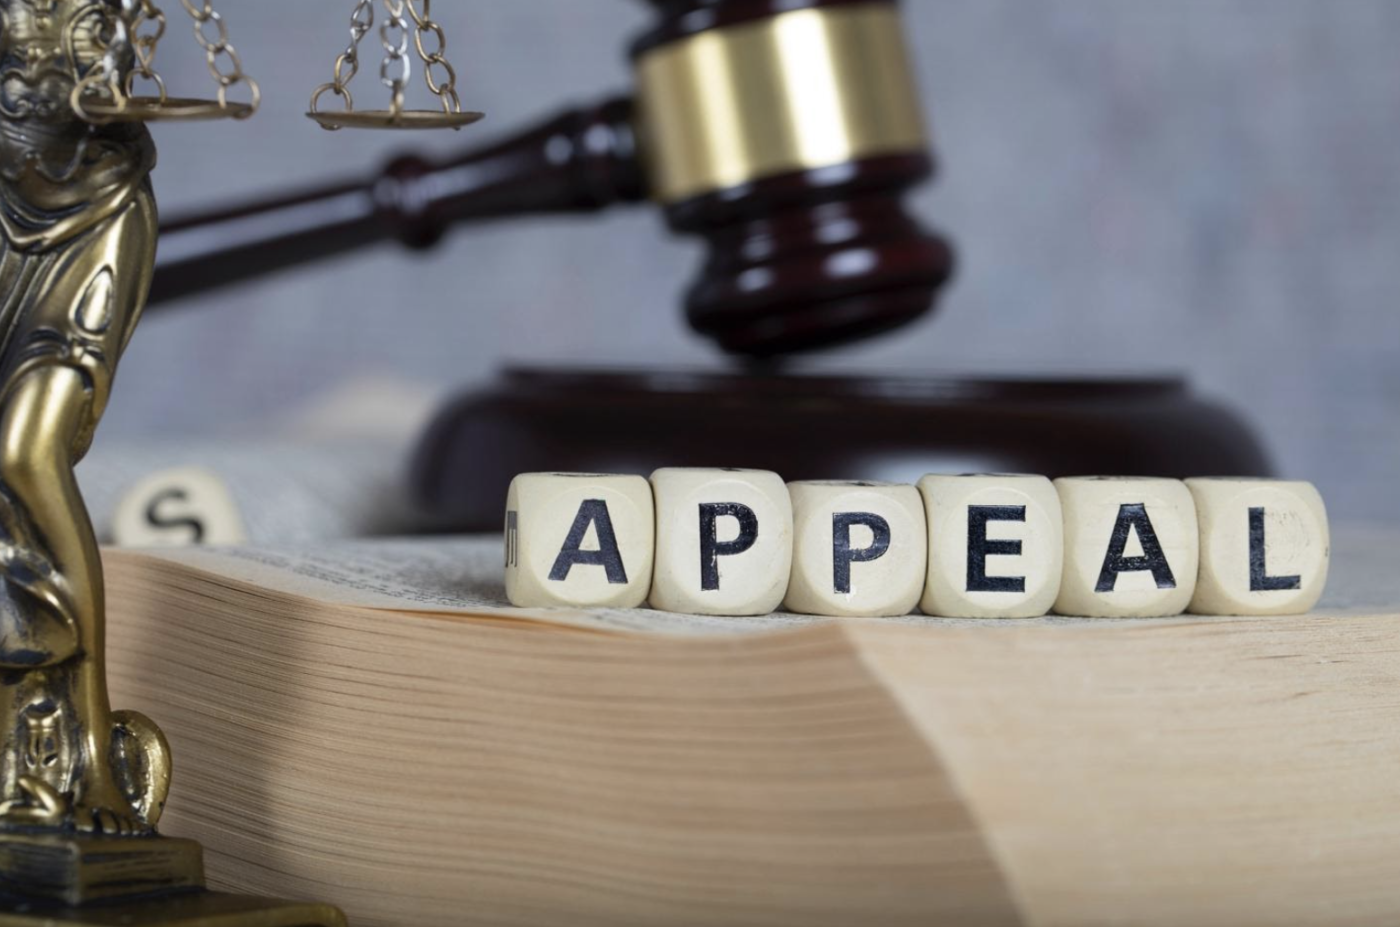 Word 'APPEAL' spelled out with letter blocks in front of a gavel and the scales of justice, symbolizing the judicial process of appealing a criminal case.